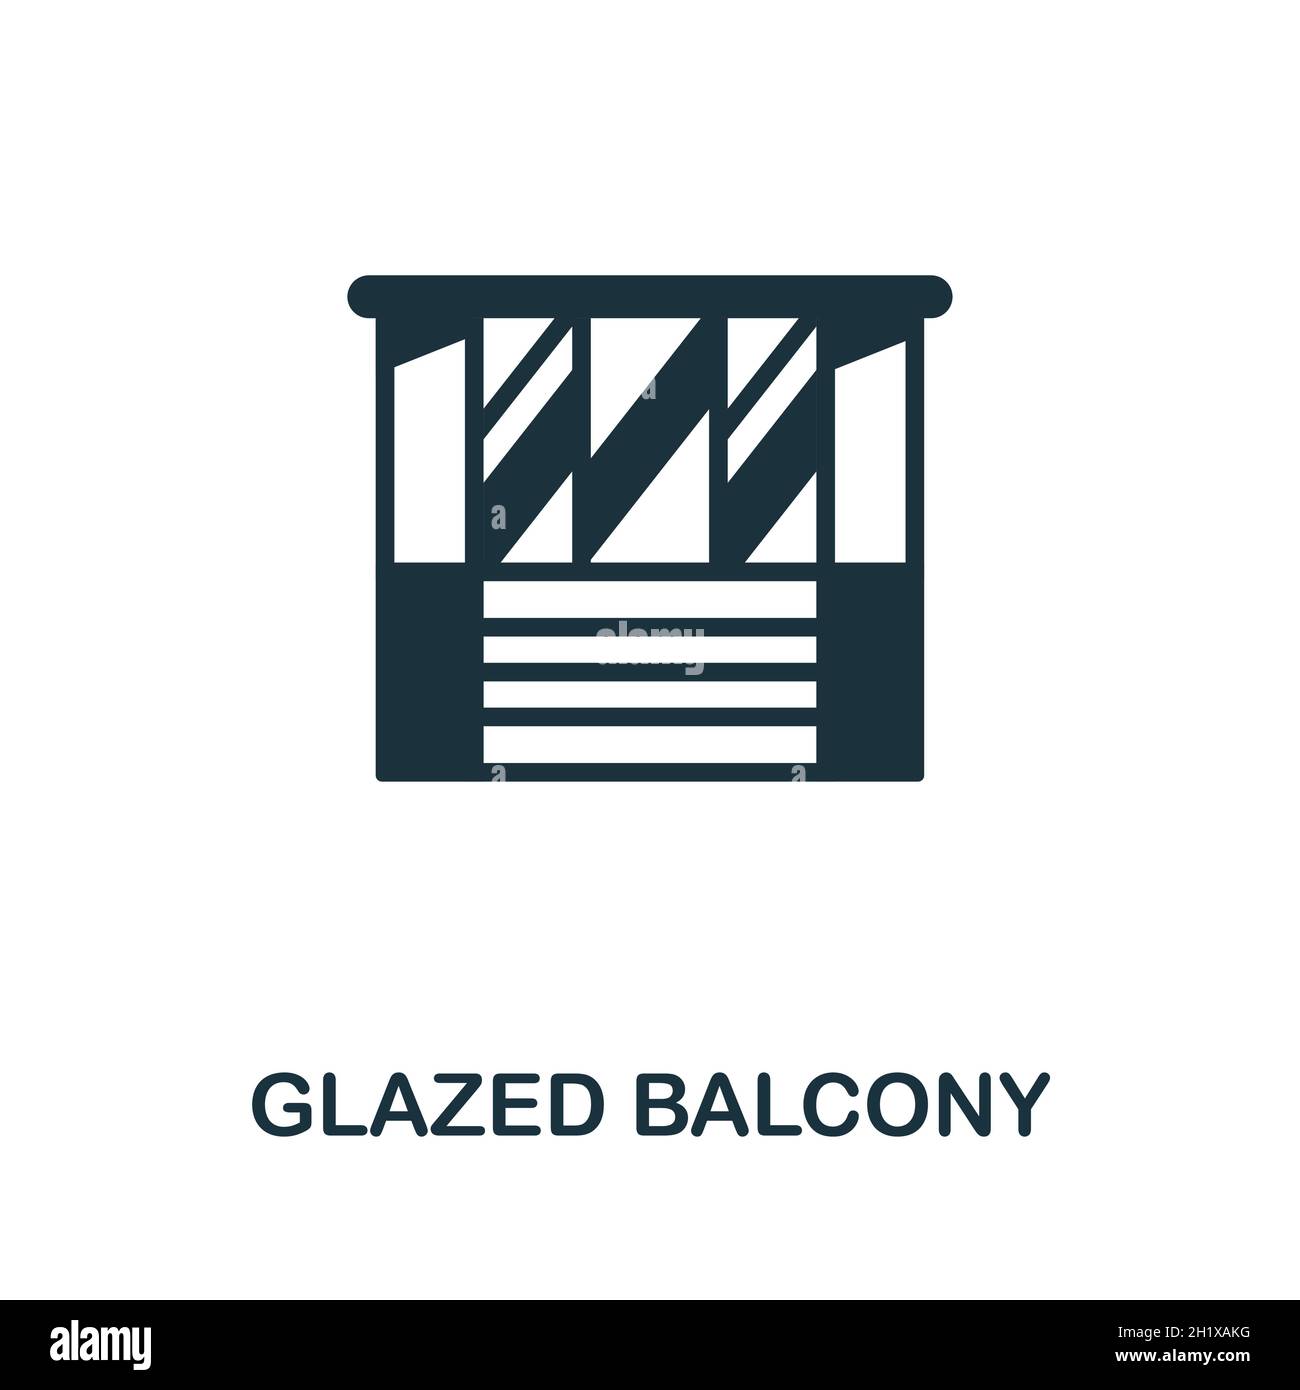 Glazed Balcony icon. Monochrome sign from balcony collection. Creative Glazed Balcony icon illustration for web design, infographics and more Stock Vector